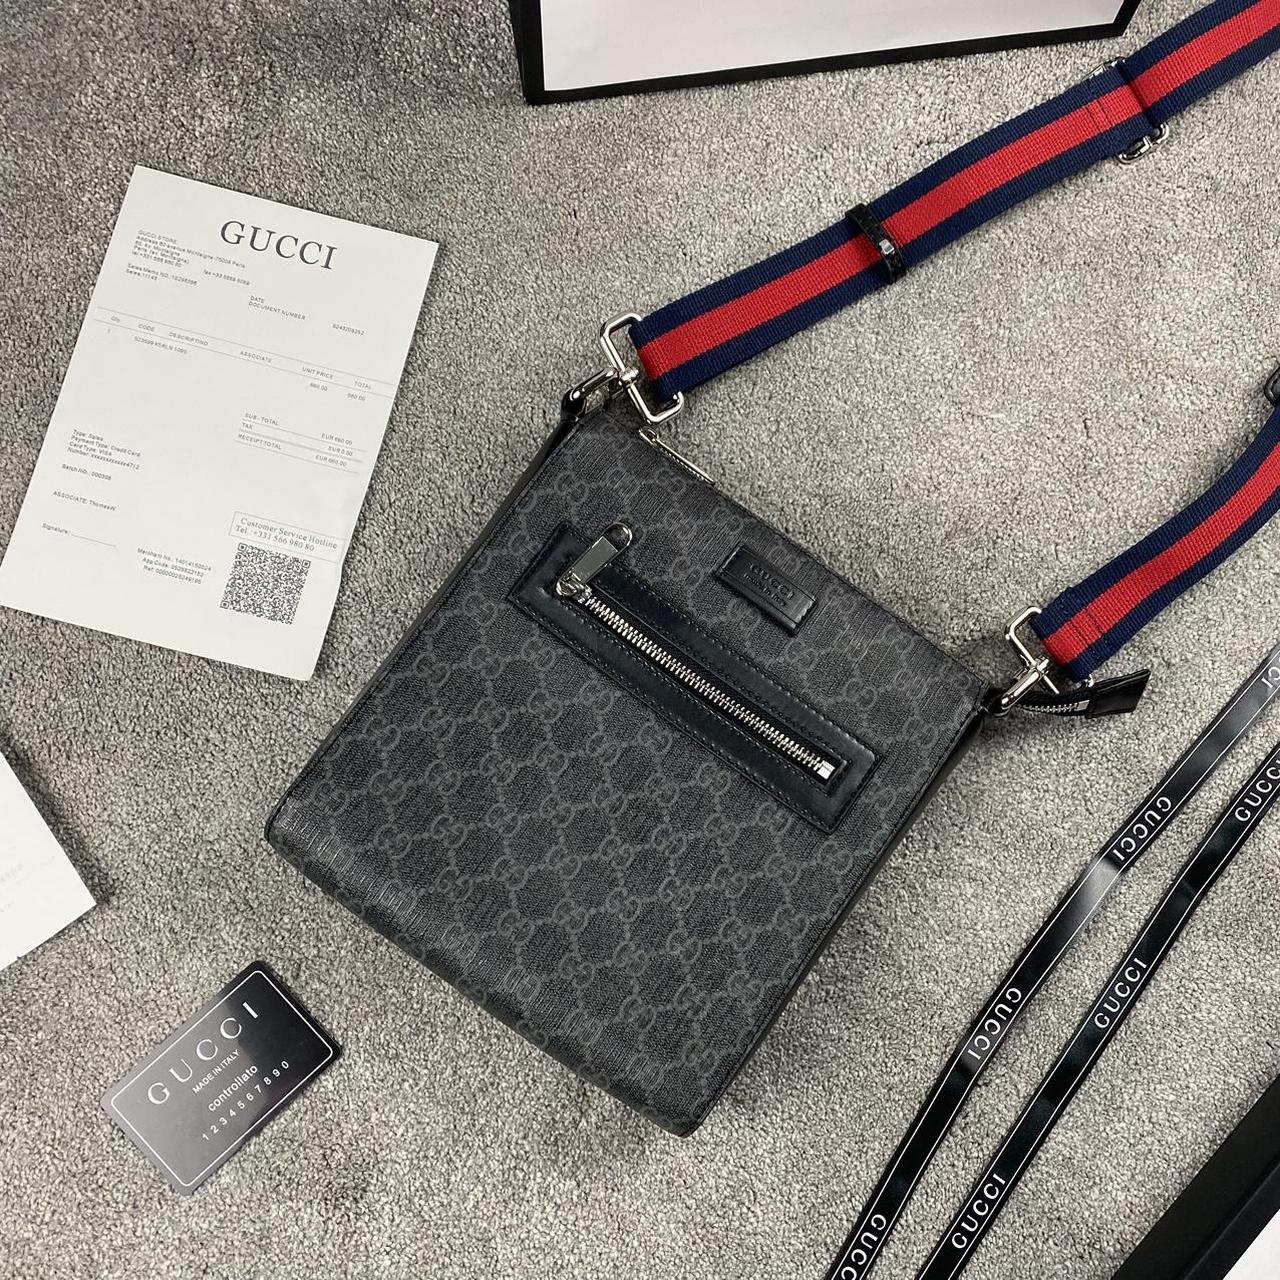 Gucci Messenger Bag Next Day Delivery 🚚 Comes with... - Depop